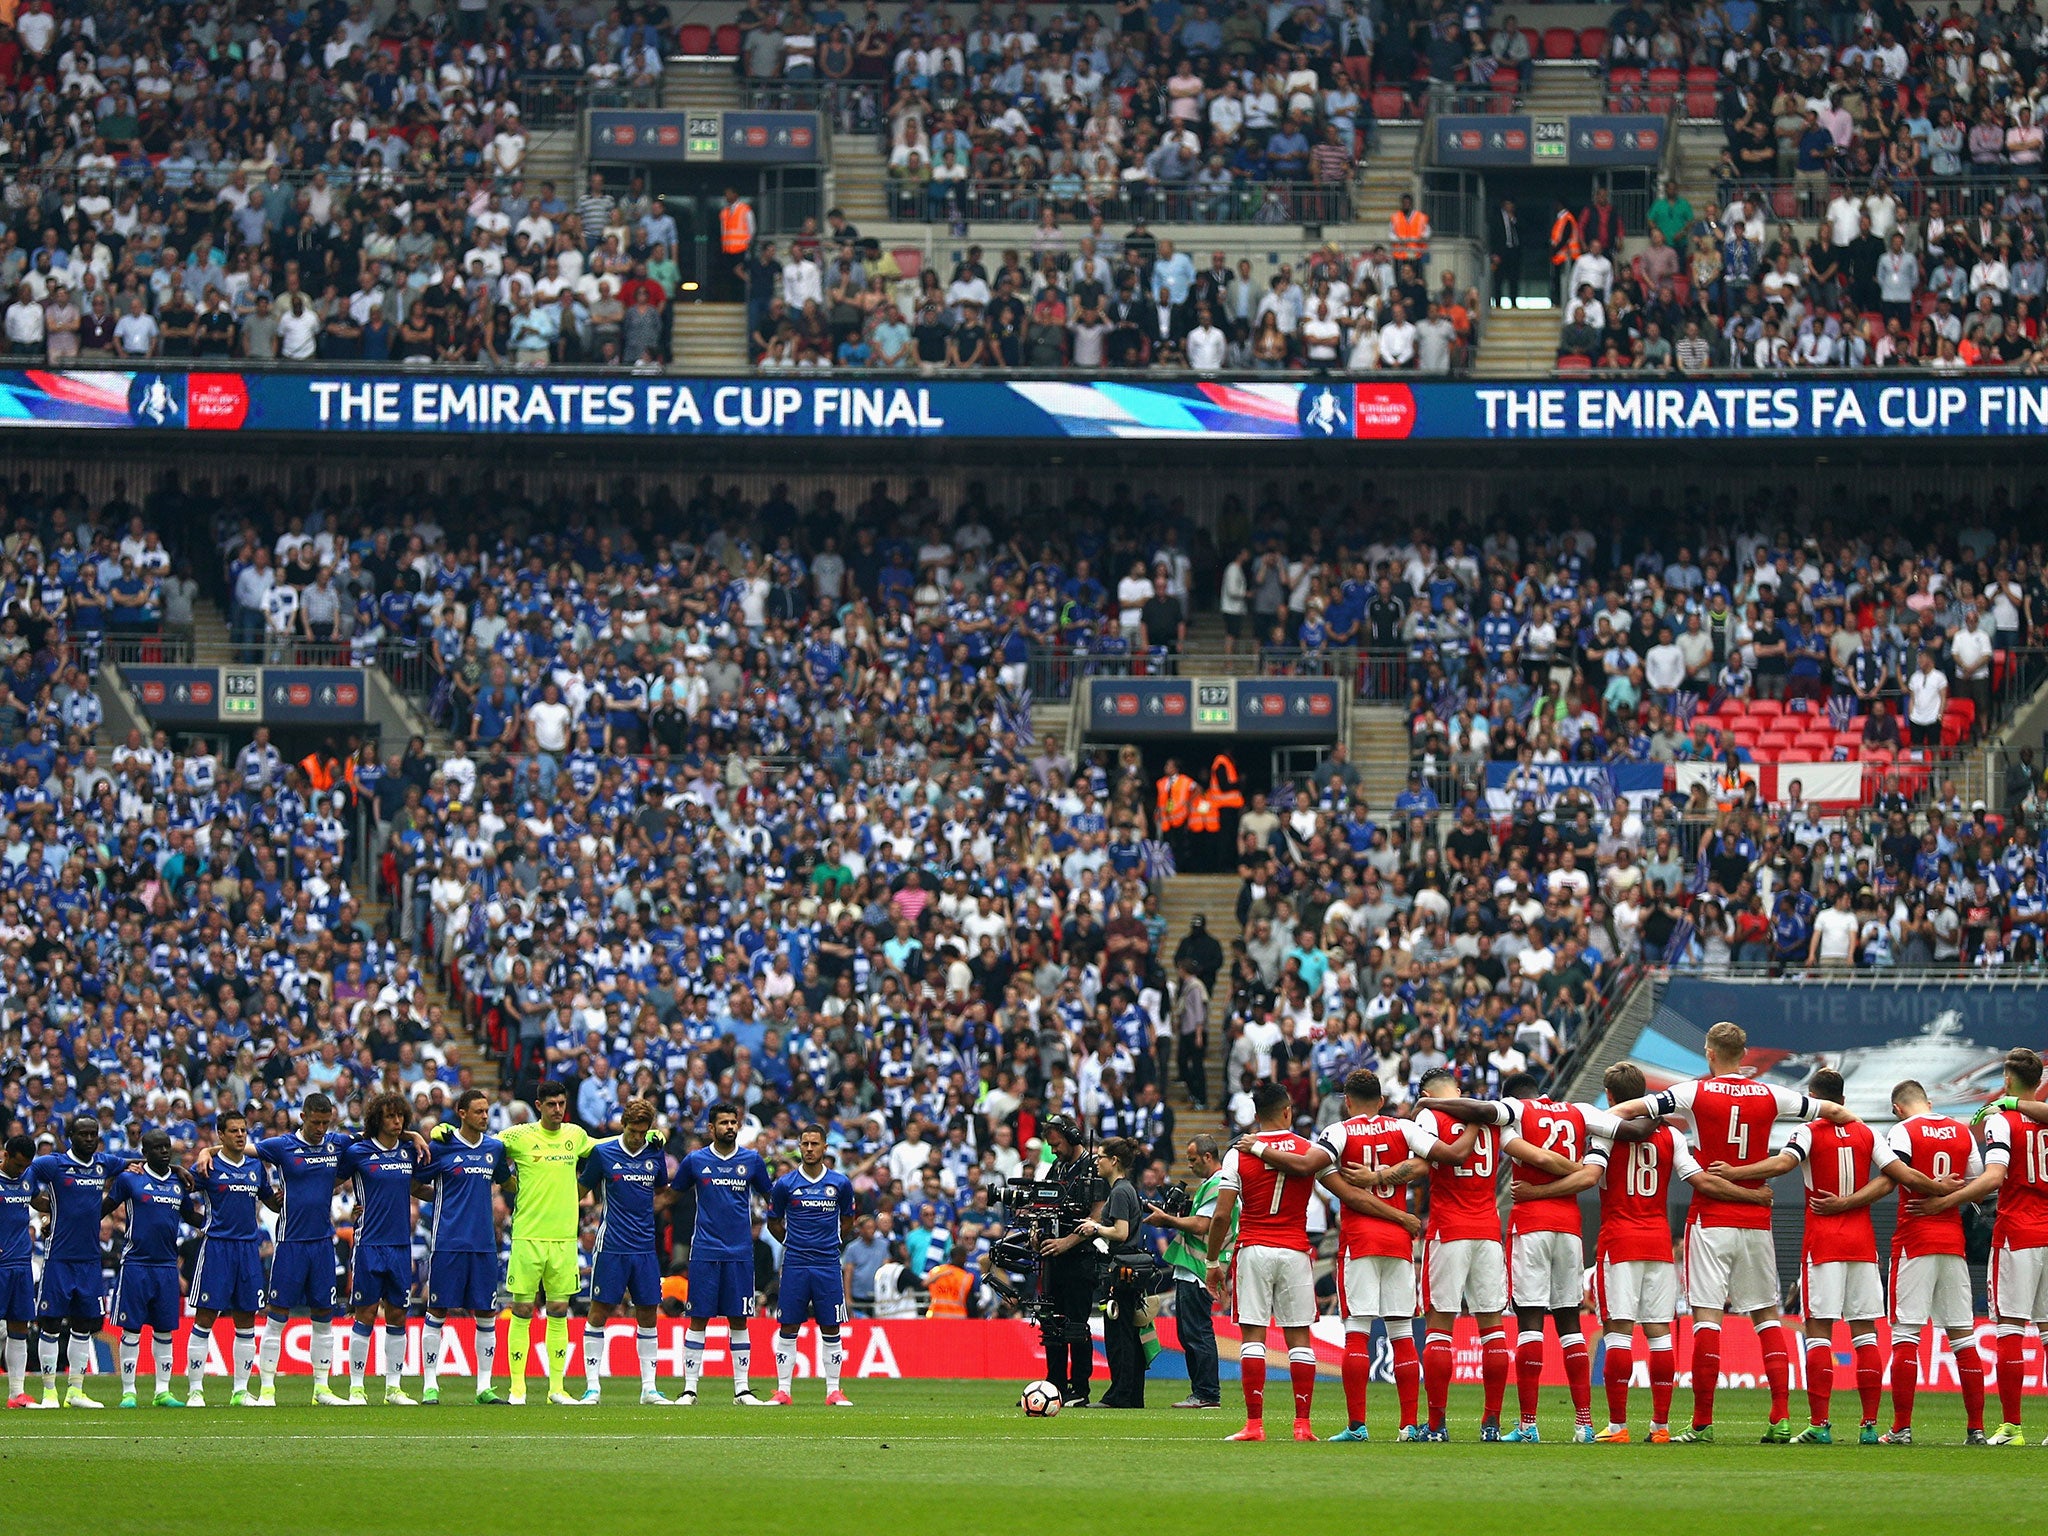 Arsenal and Chelsea met in last month's FA Cup final at Wembley